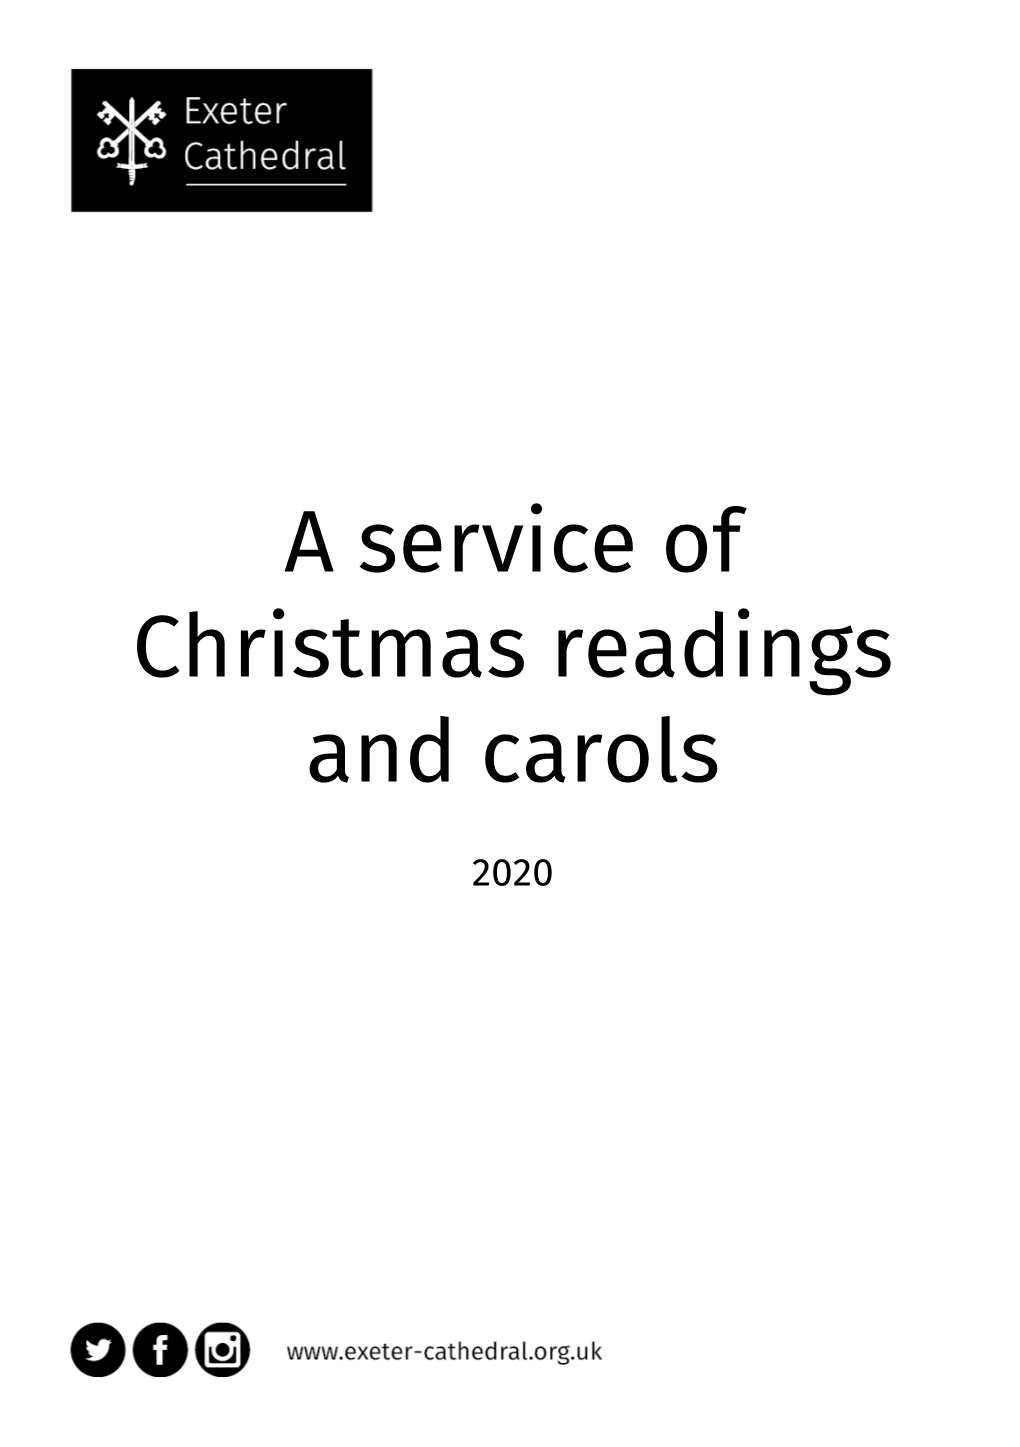 A Service of Christmas Readings and Carols